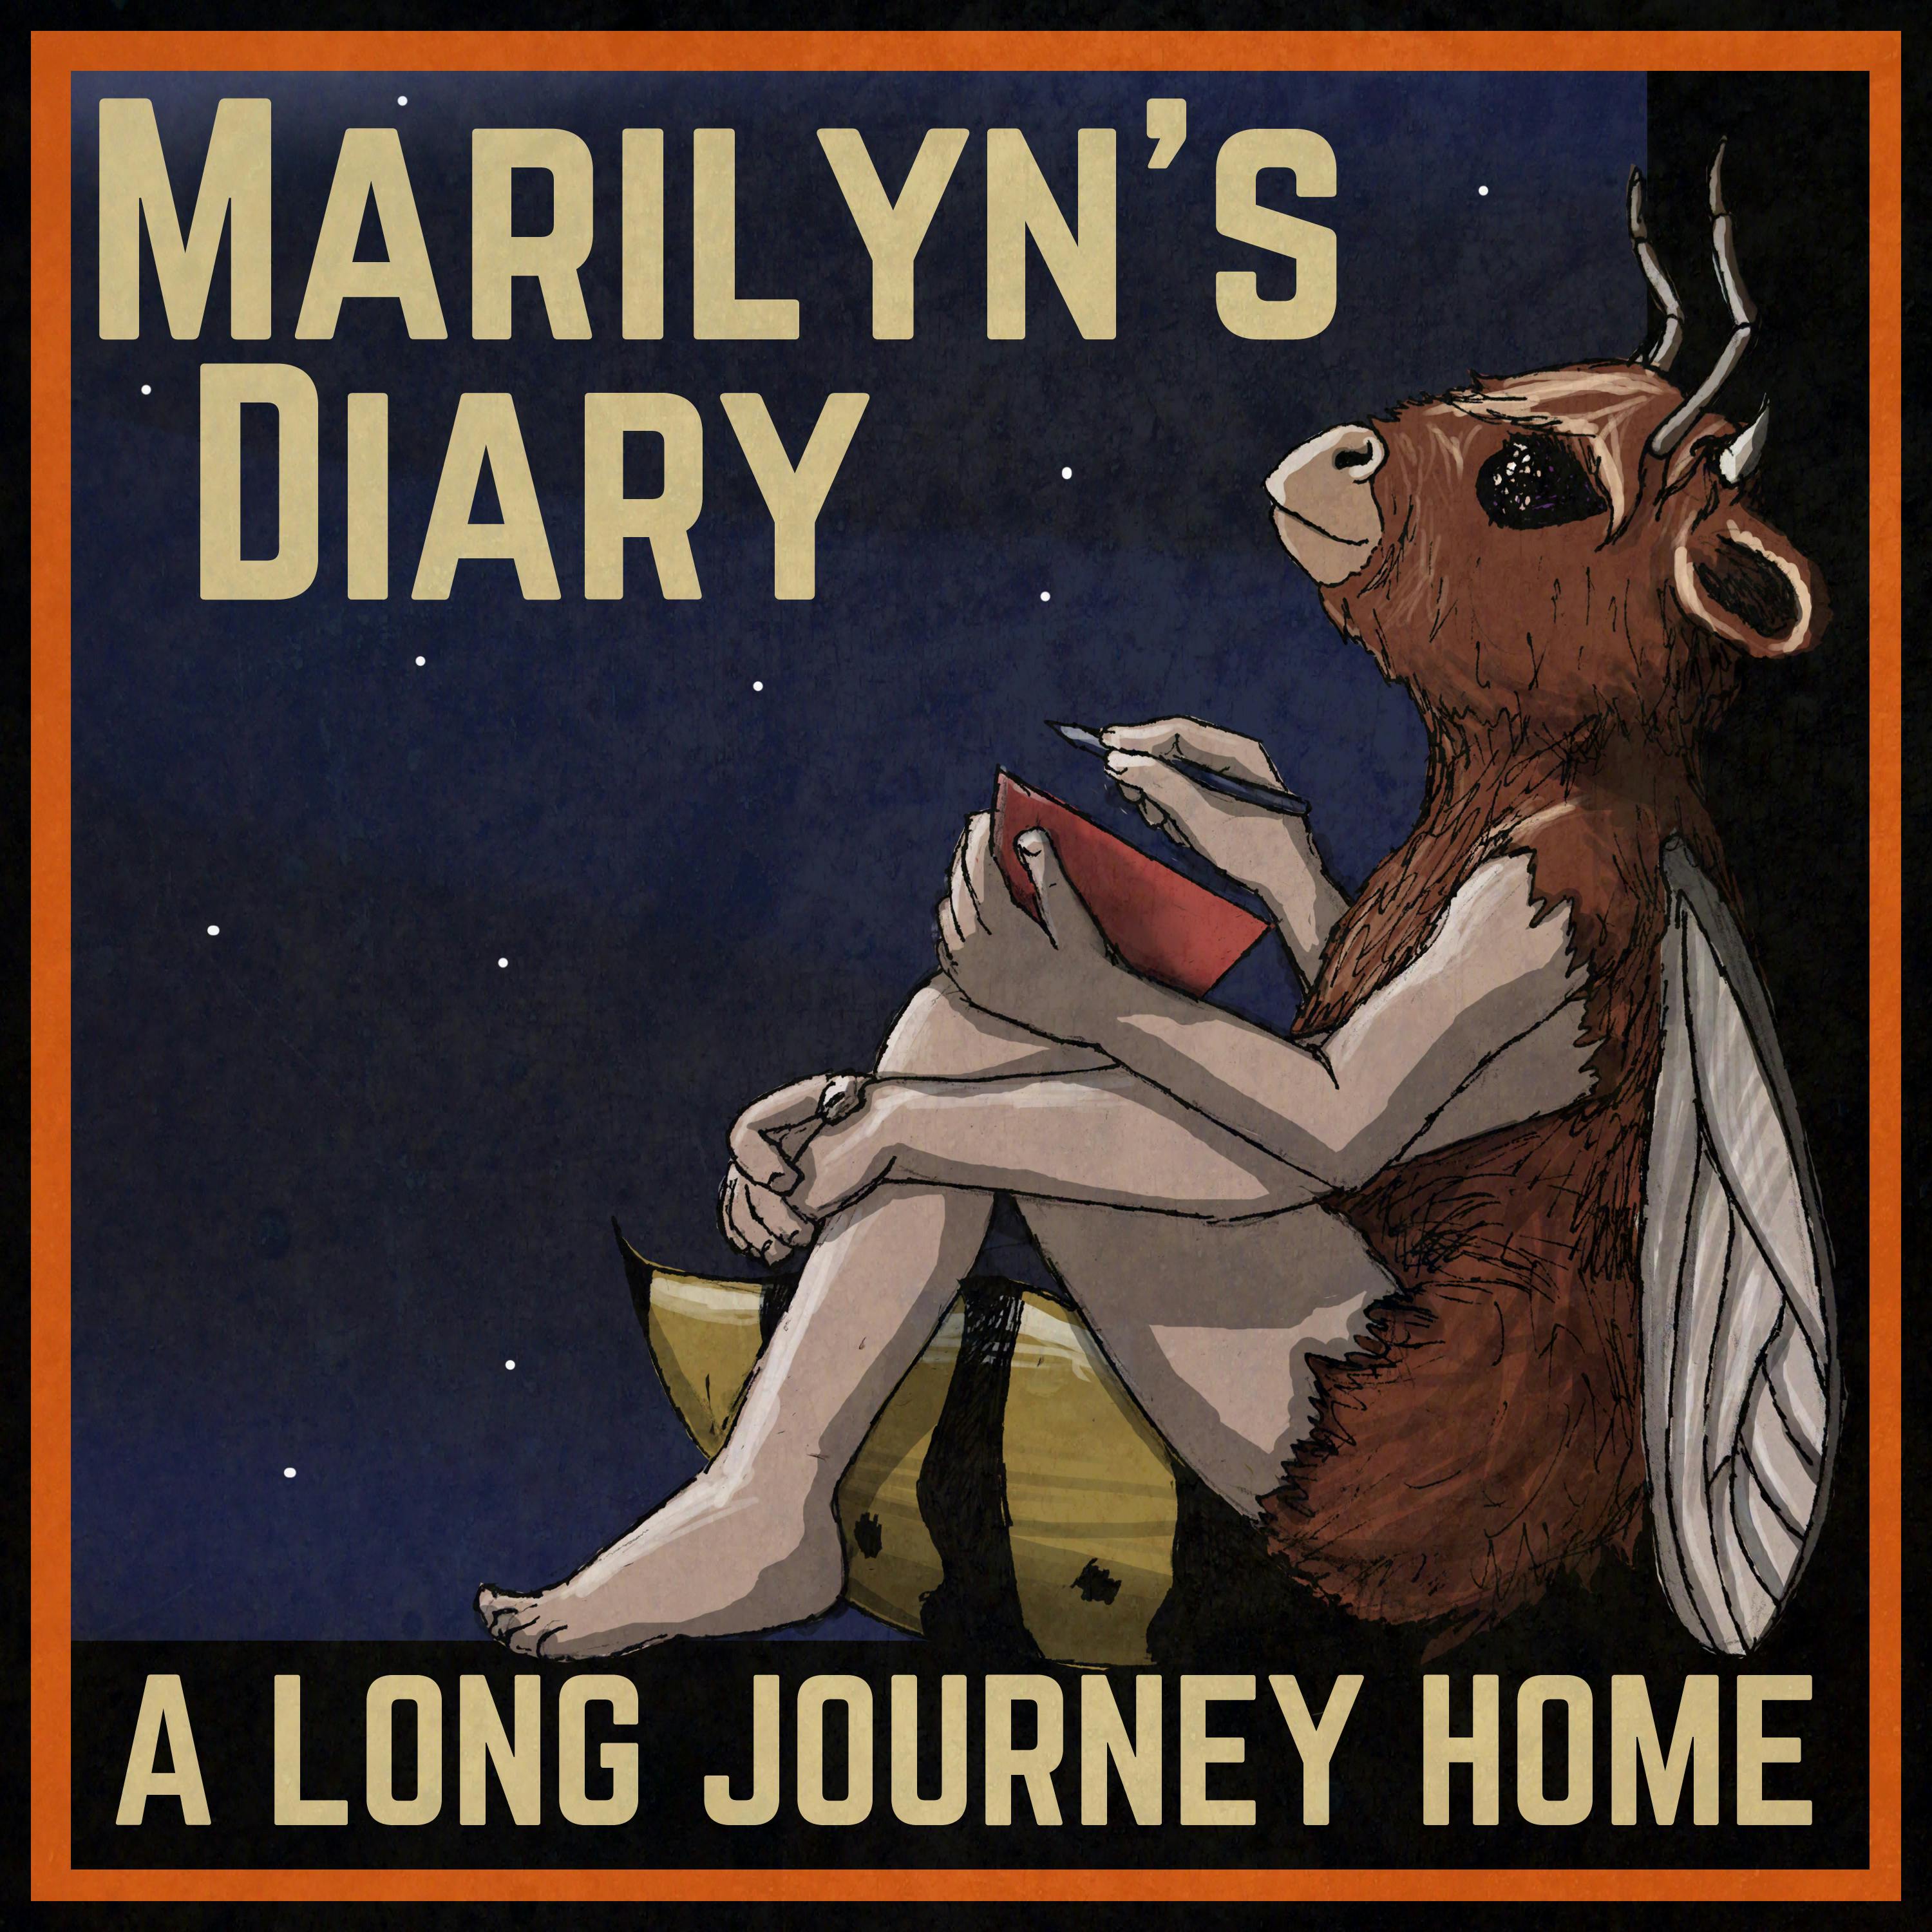 Marilyn’s Diary: A Long Journey Home - E08